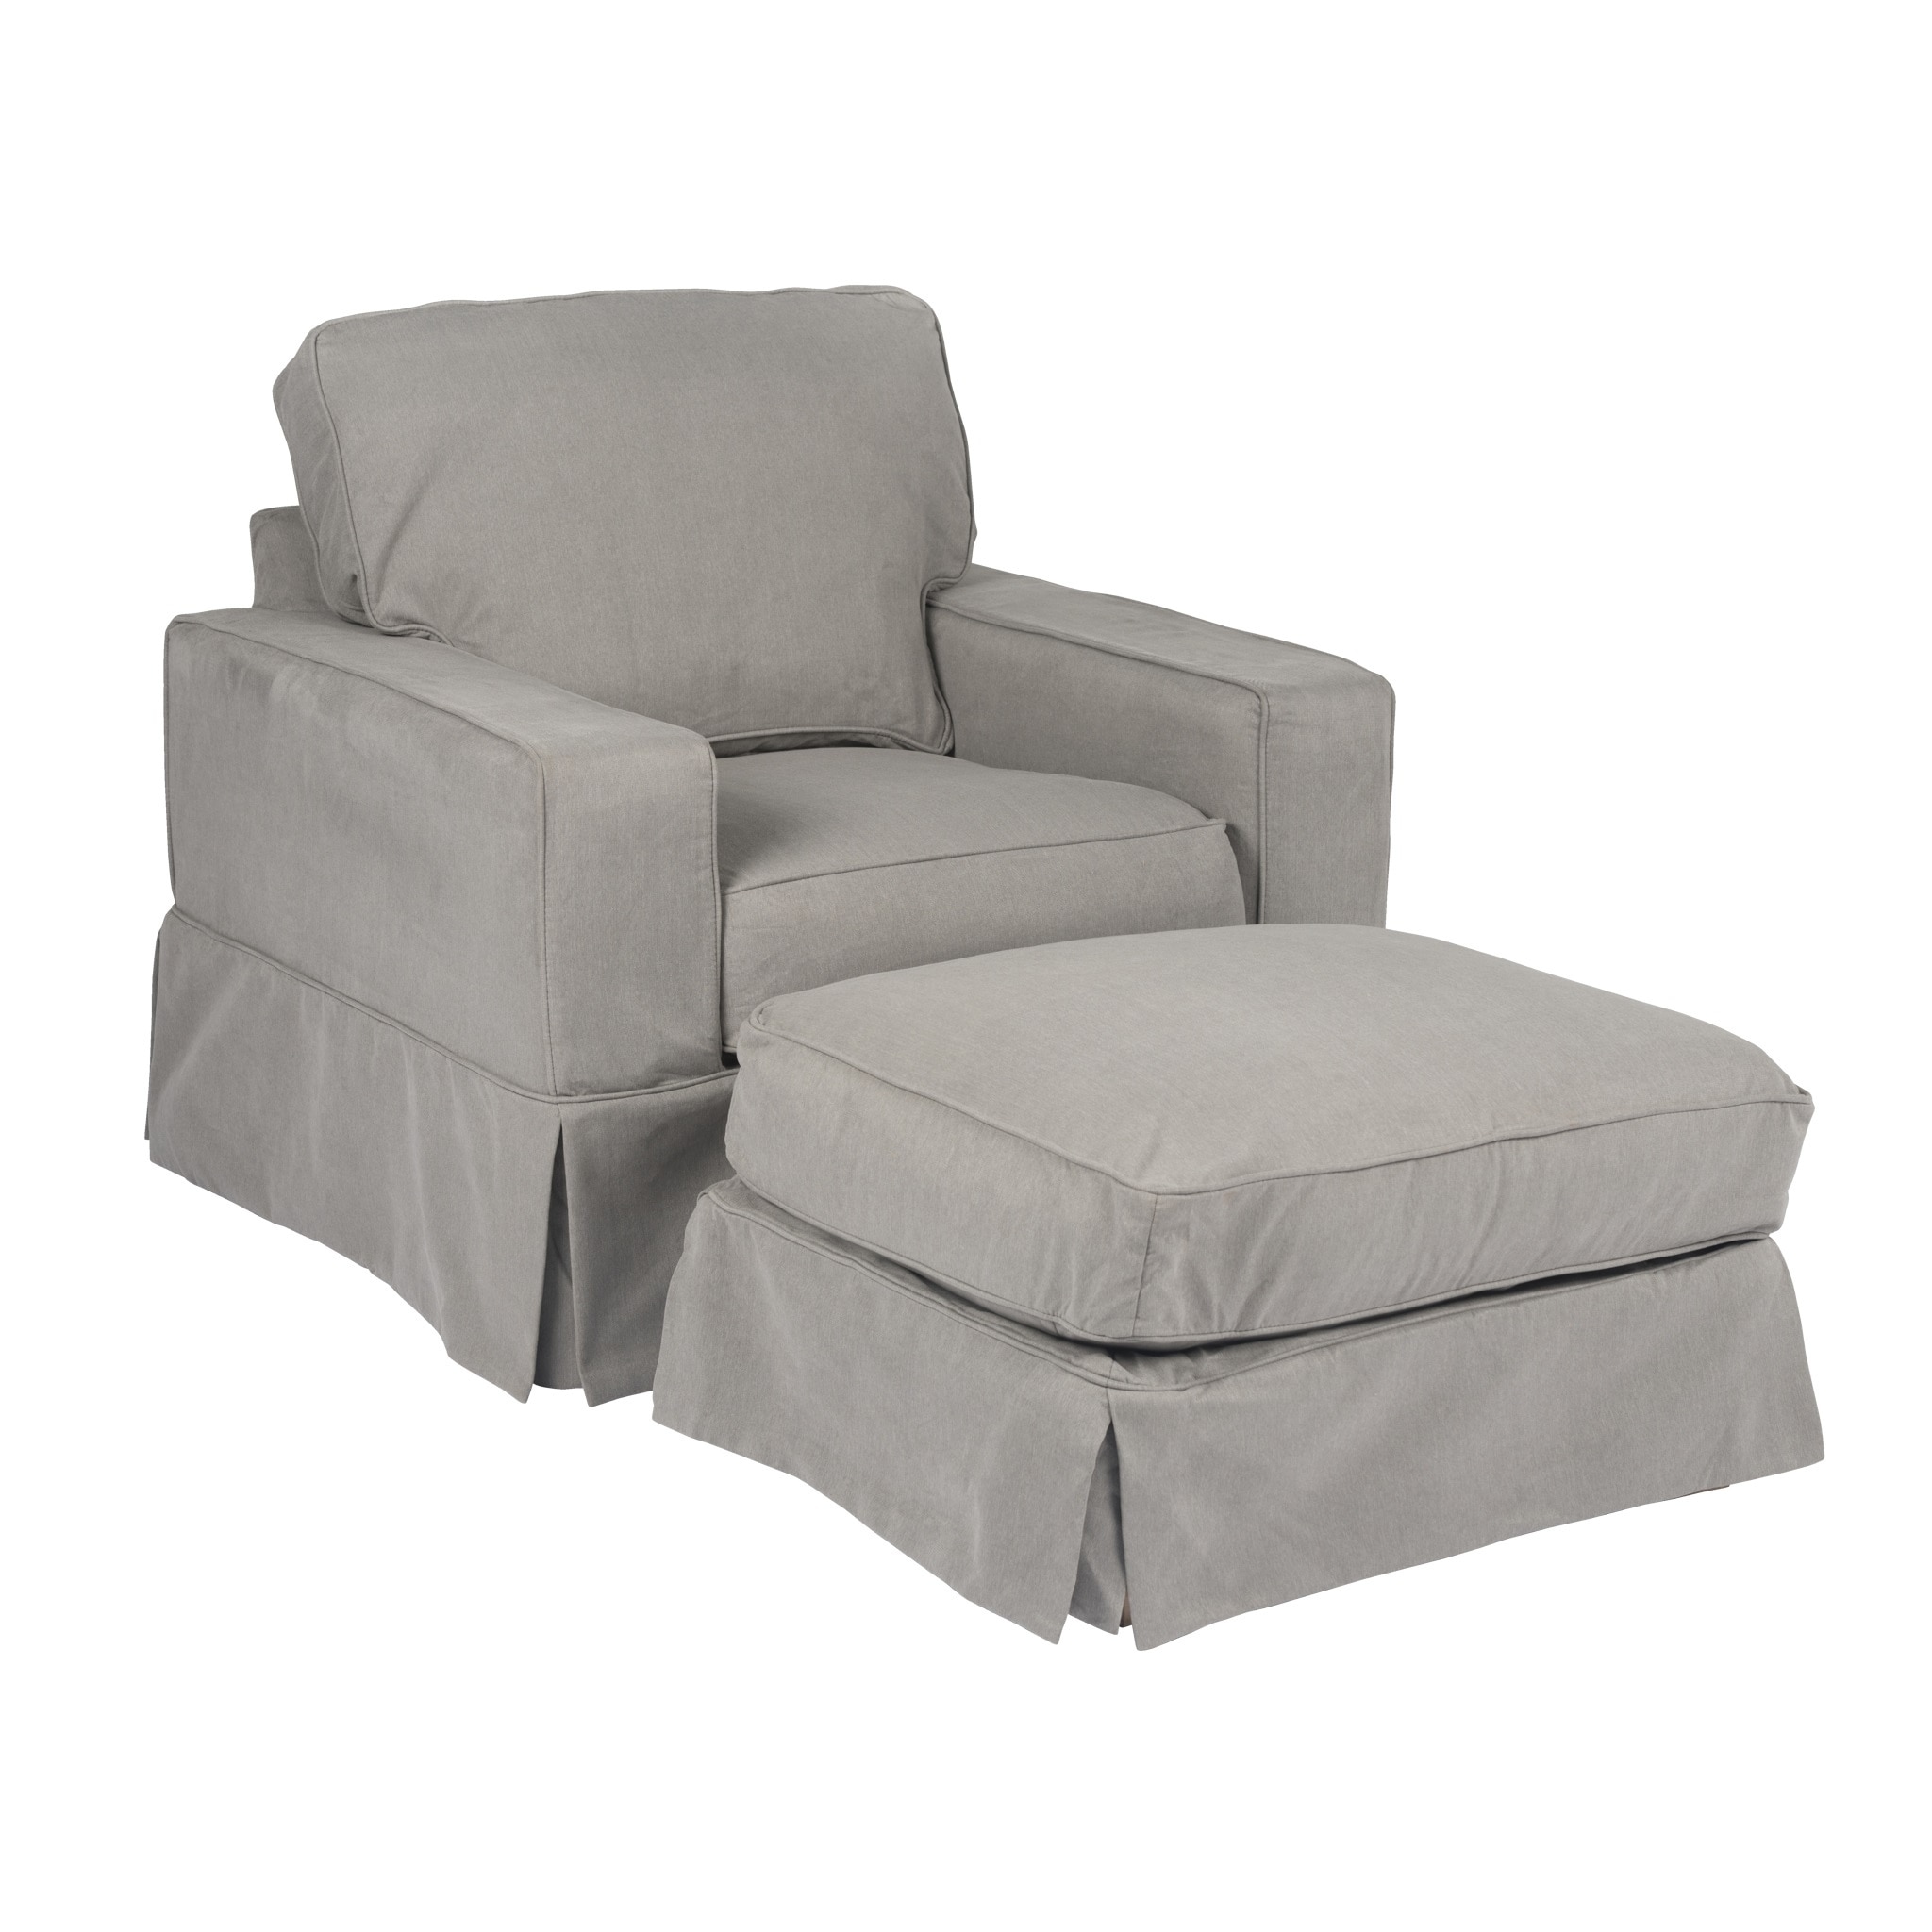 Shop Sunset Trading Americana Chair And Ottoman Slipcover Set